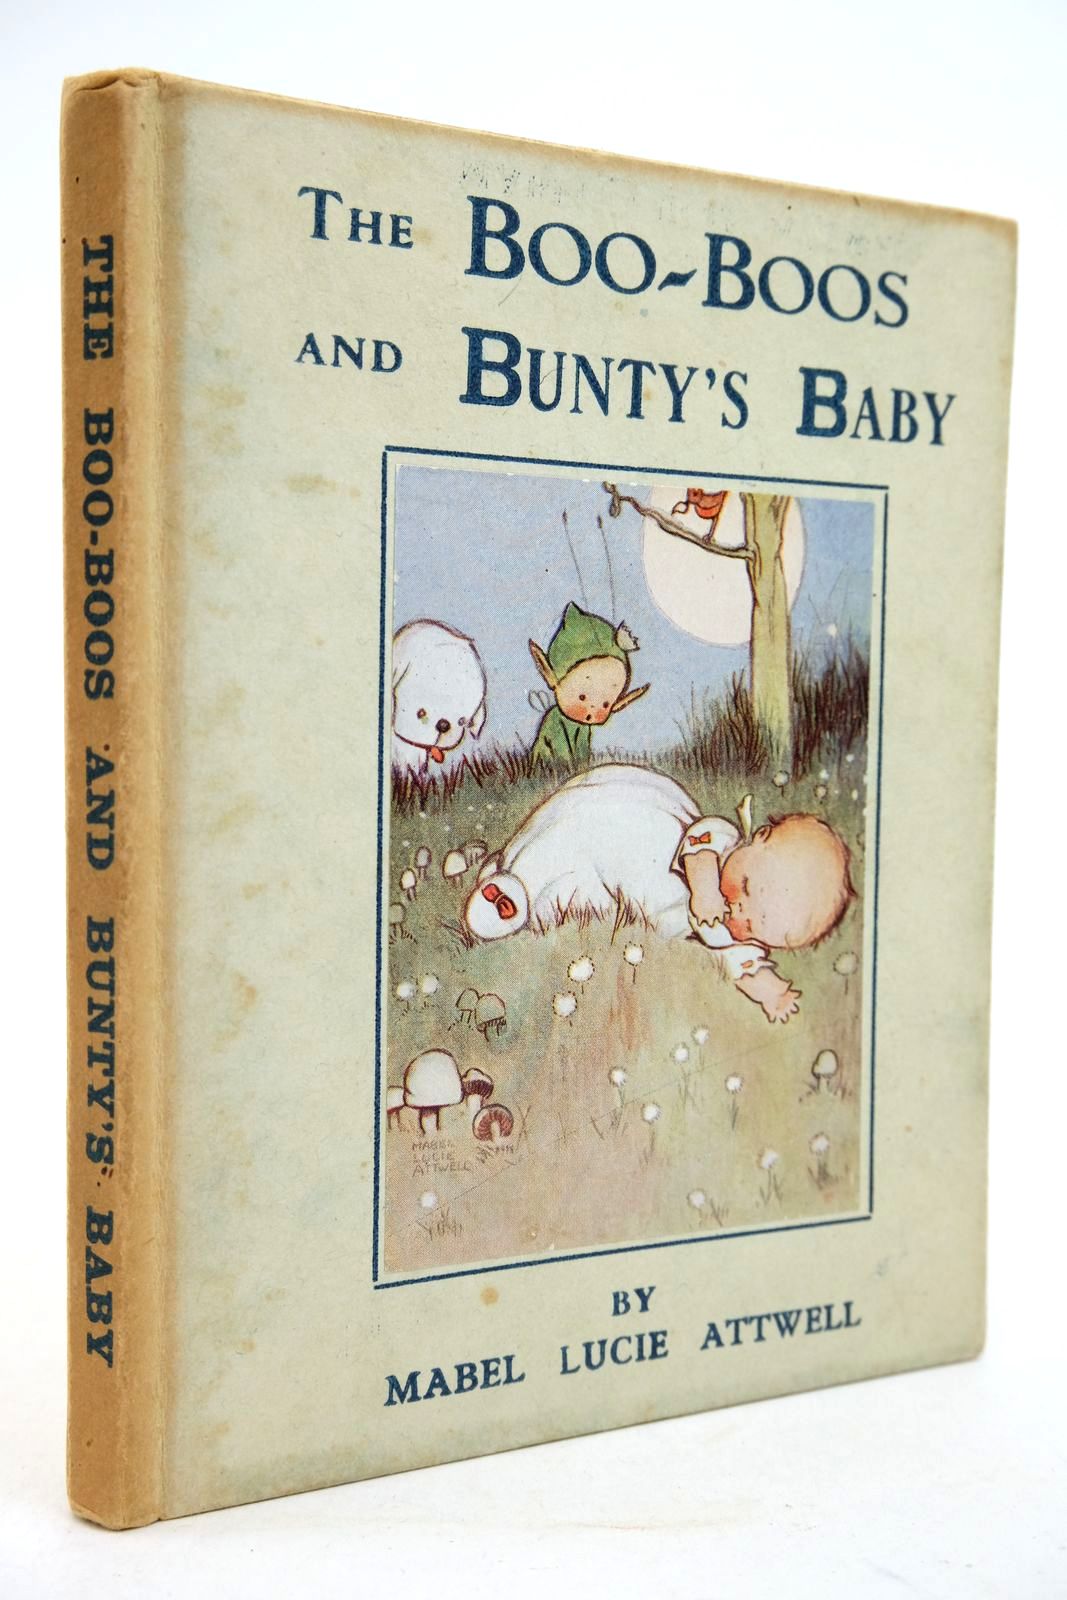 Photo of THE BOO-BOOS AND BUNTY'S BABY written by Attwell, Mabel Lucie illustrated by Attwell, Mabel Lucie published by Valentine &amp; Sons Ltd. (STOCK CODE: 2140943)  for sale by Stella & Rose's Books